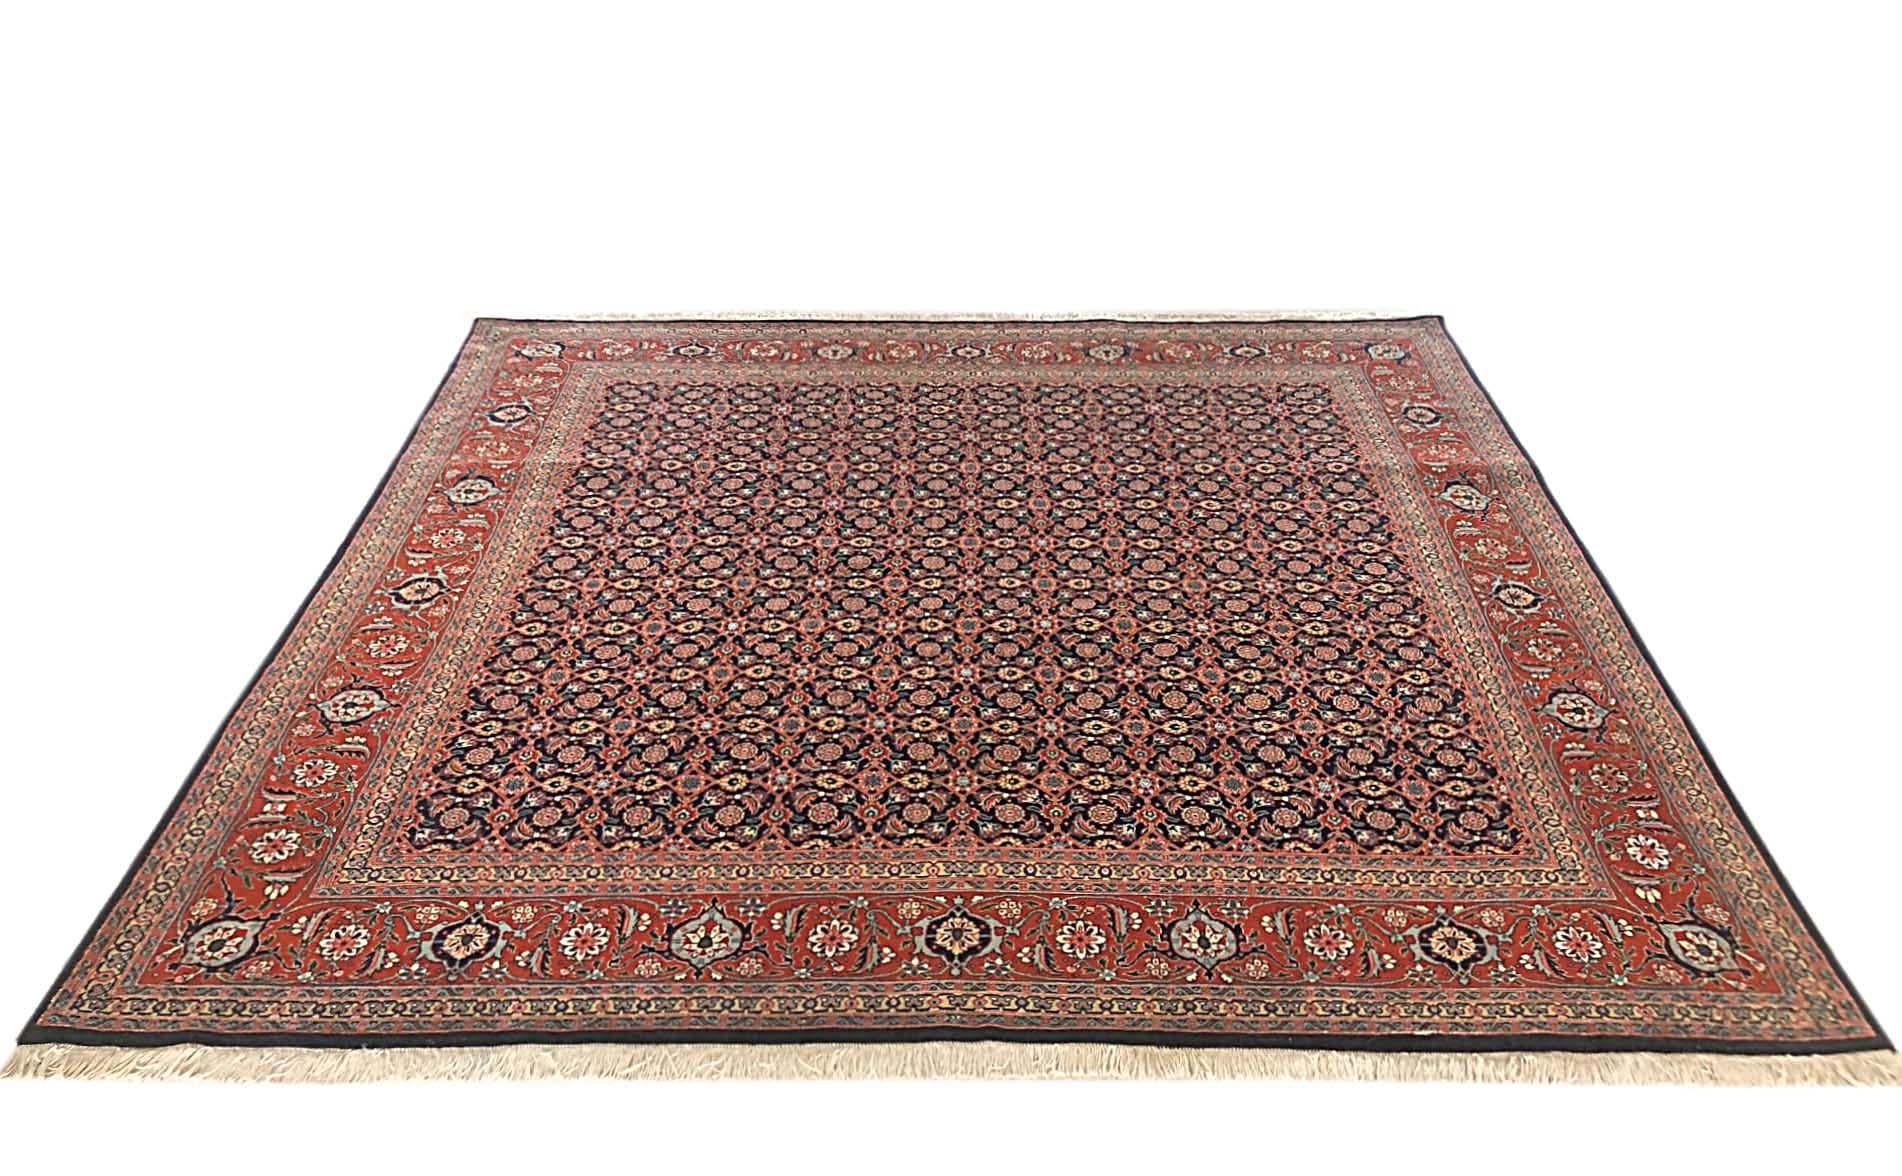 This authentic Persian Tabriz rug has wool and silk pile with cotton foundation. This rug features an all-over Herati design which is a very well-known design among Persian rugs. This piece has dark blue base color with rust border. The size is 6